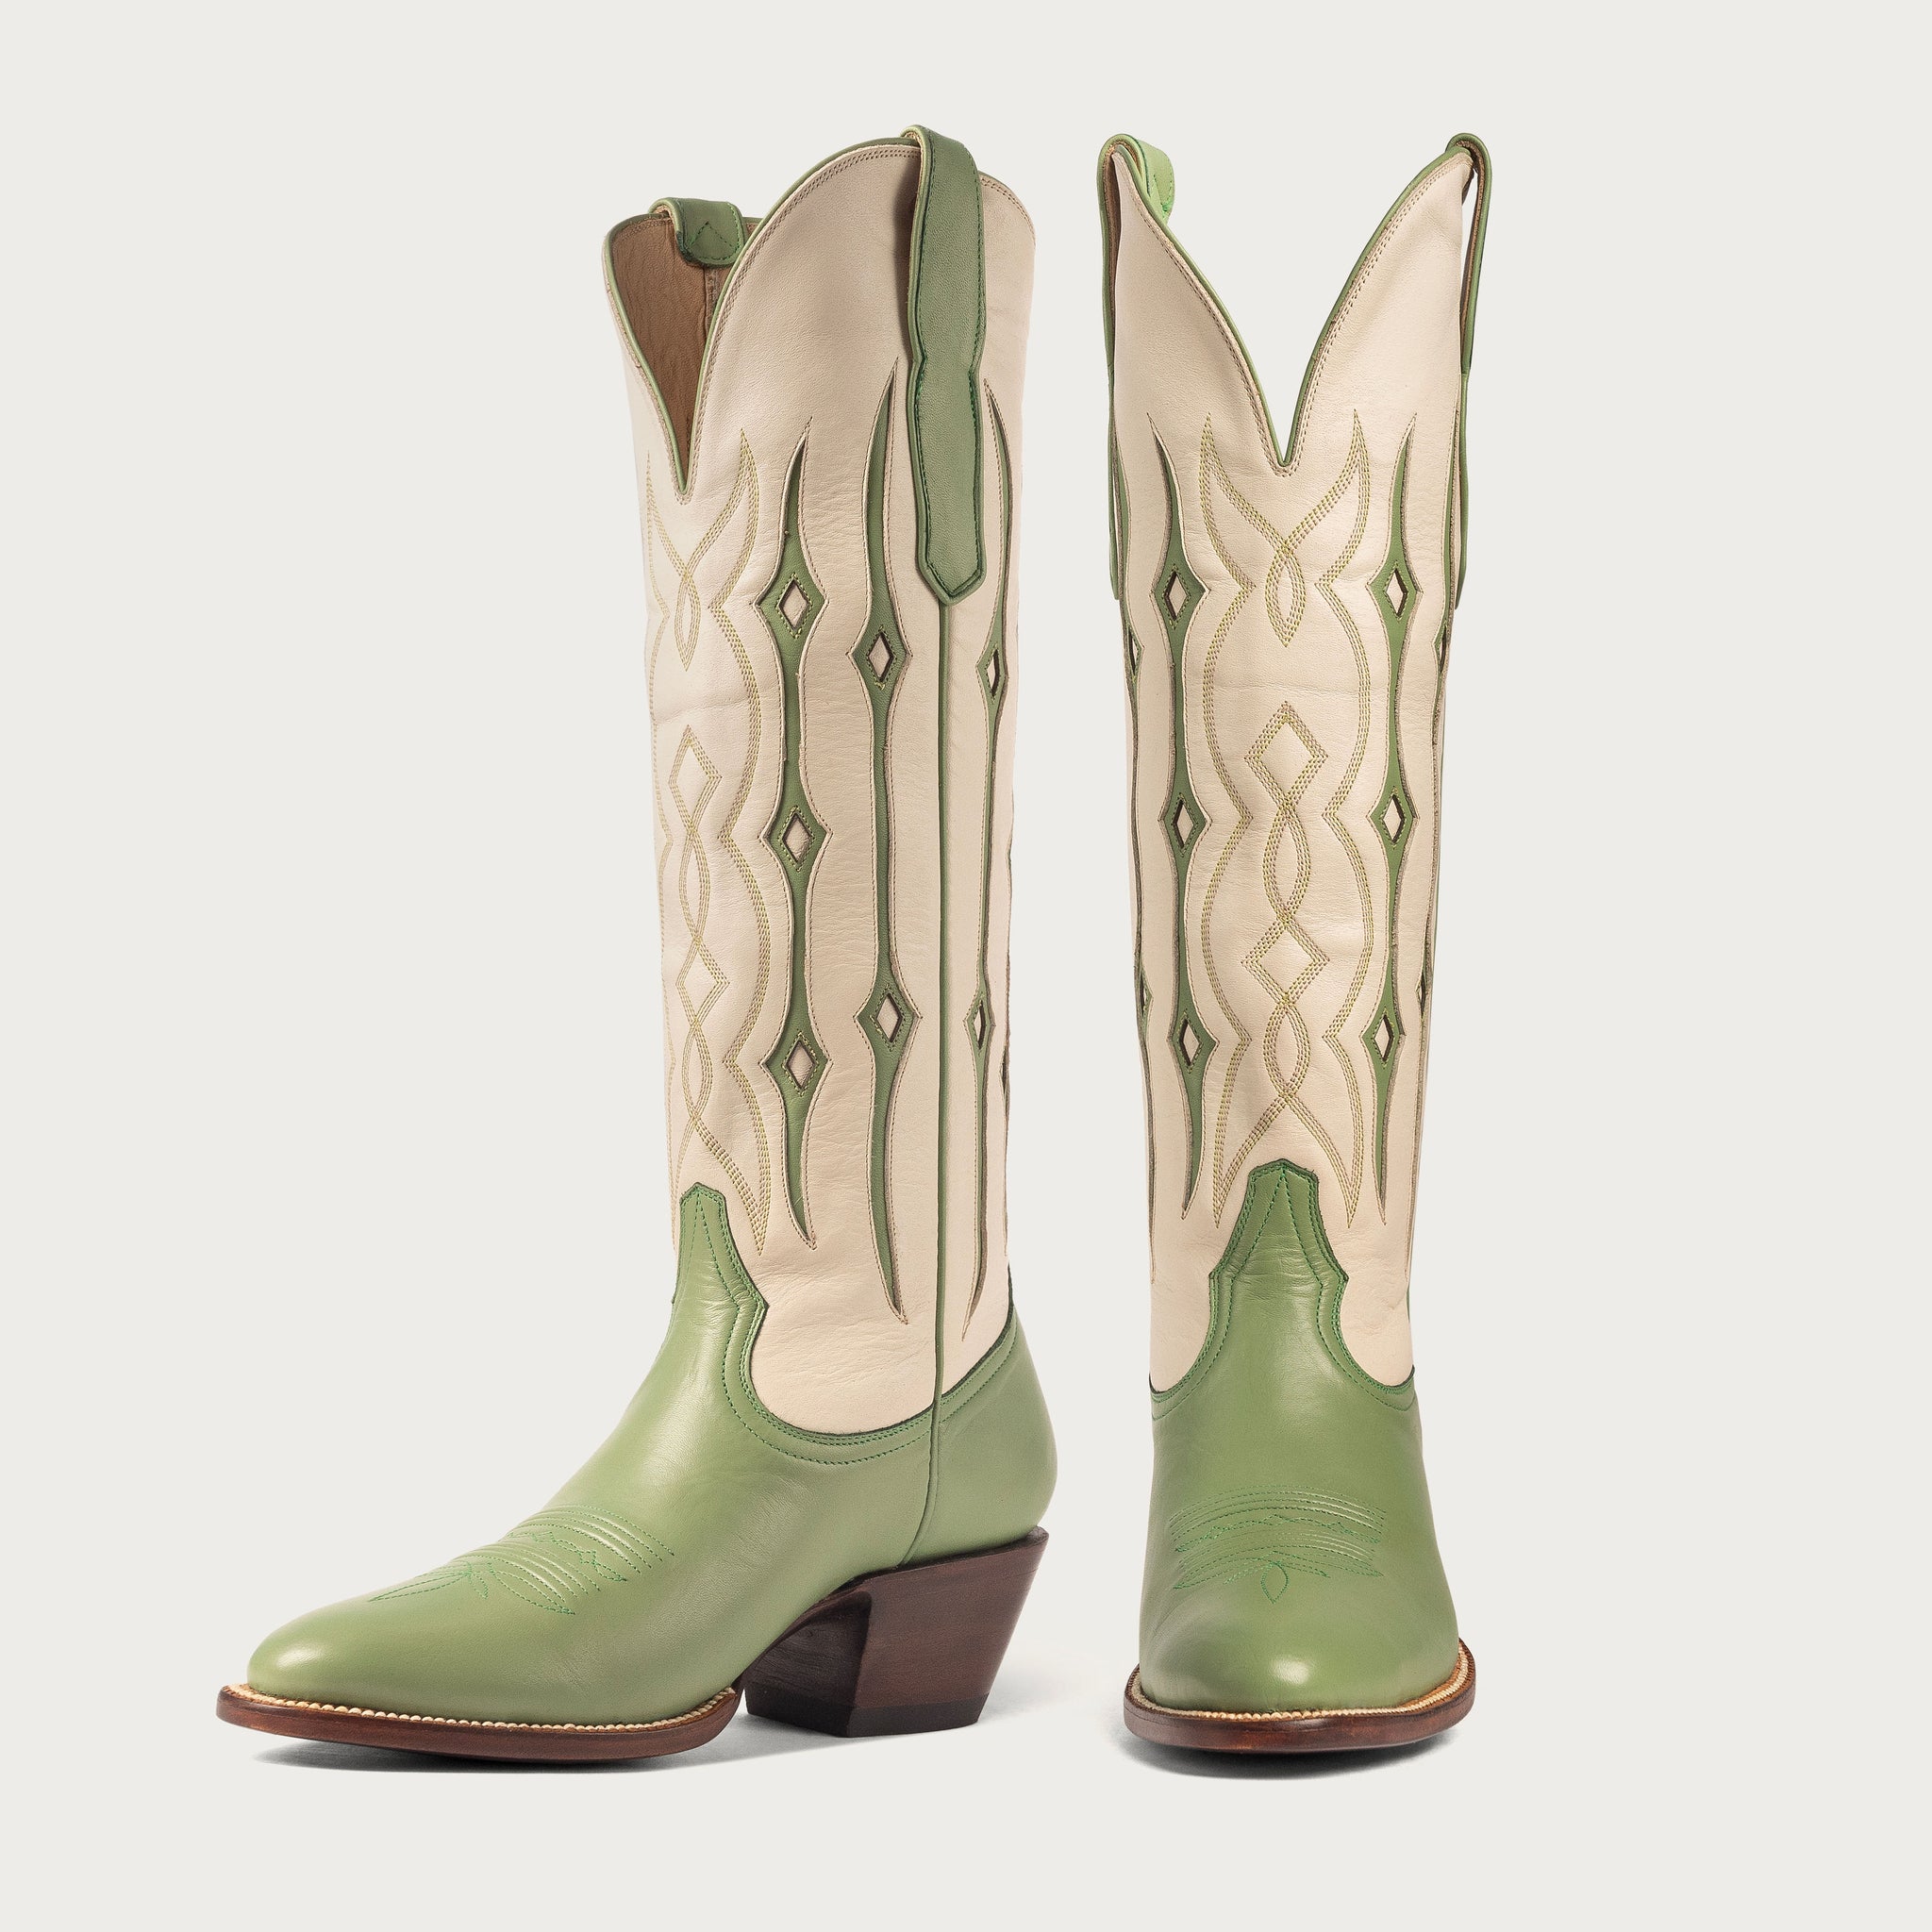 The Rainey Boot - CITY Boots